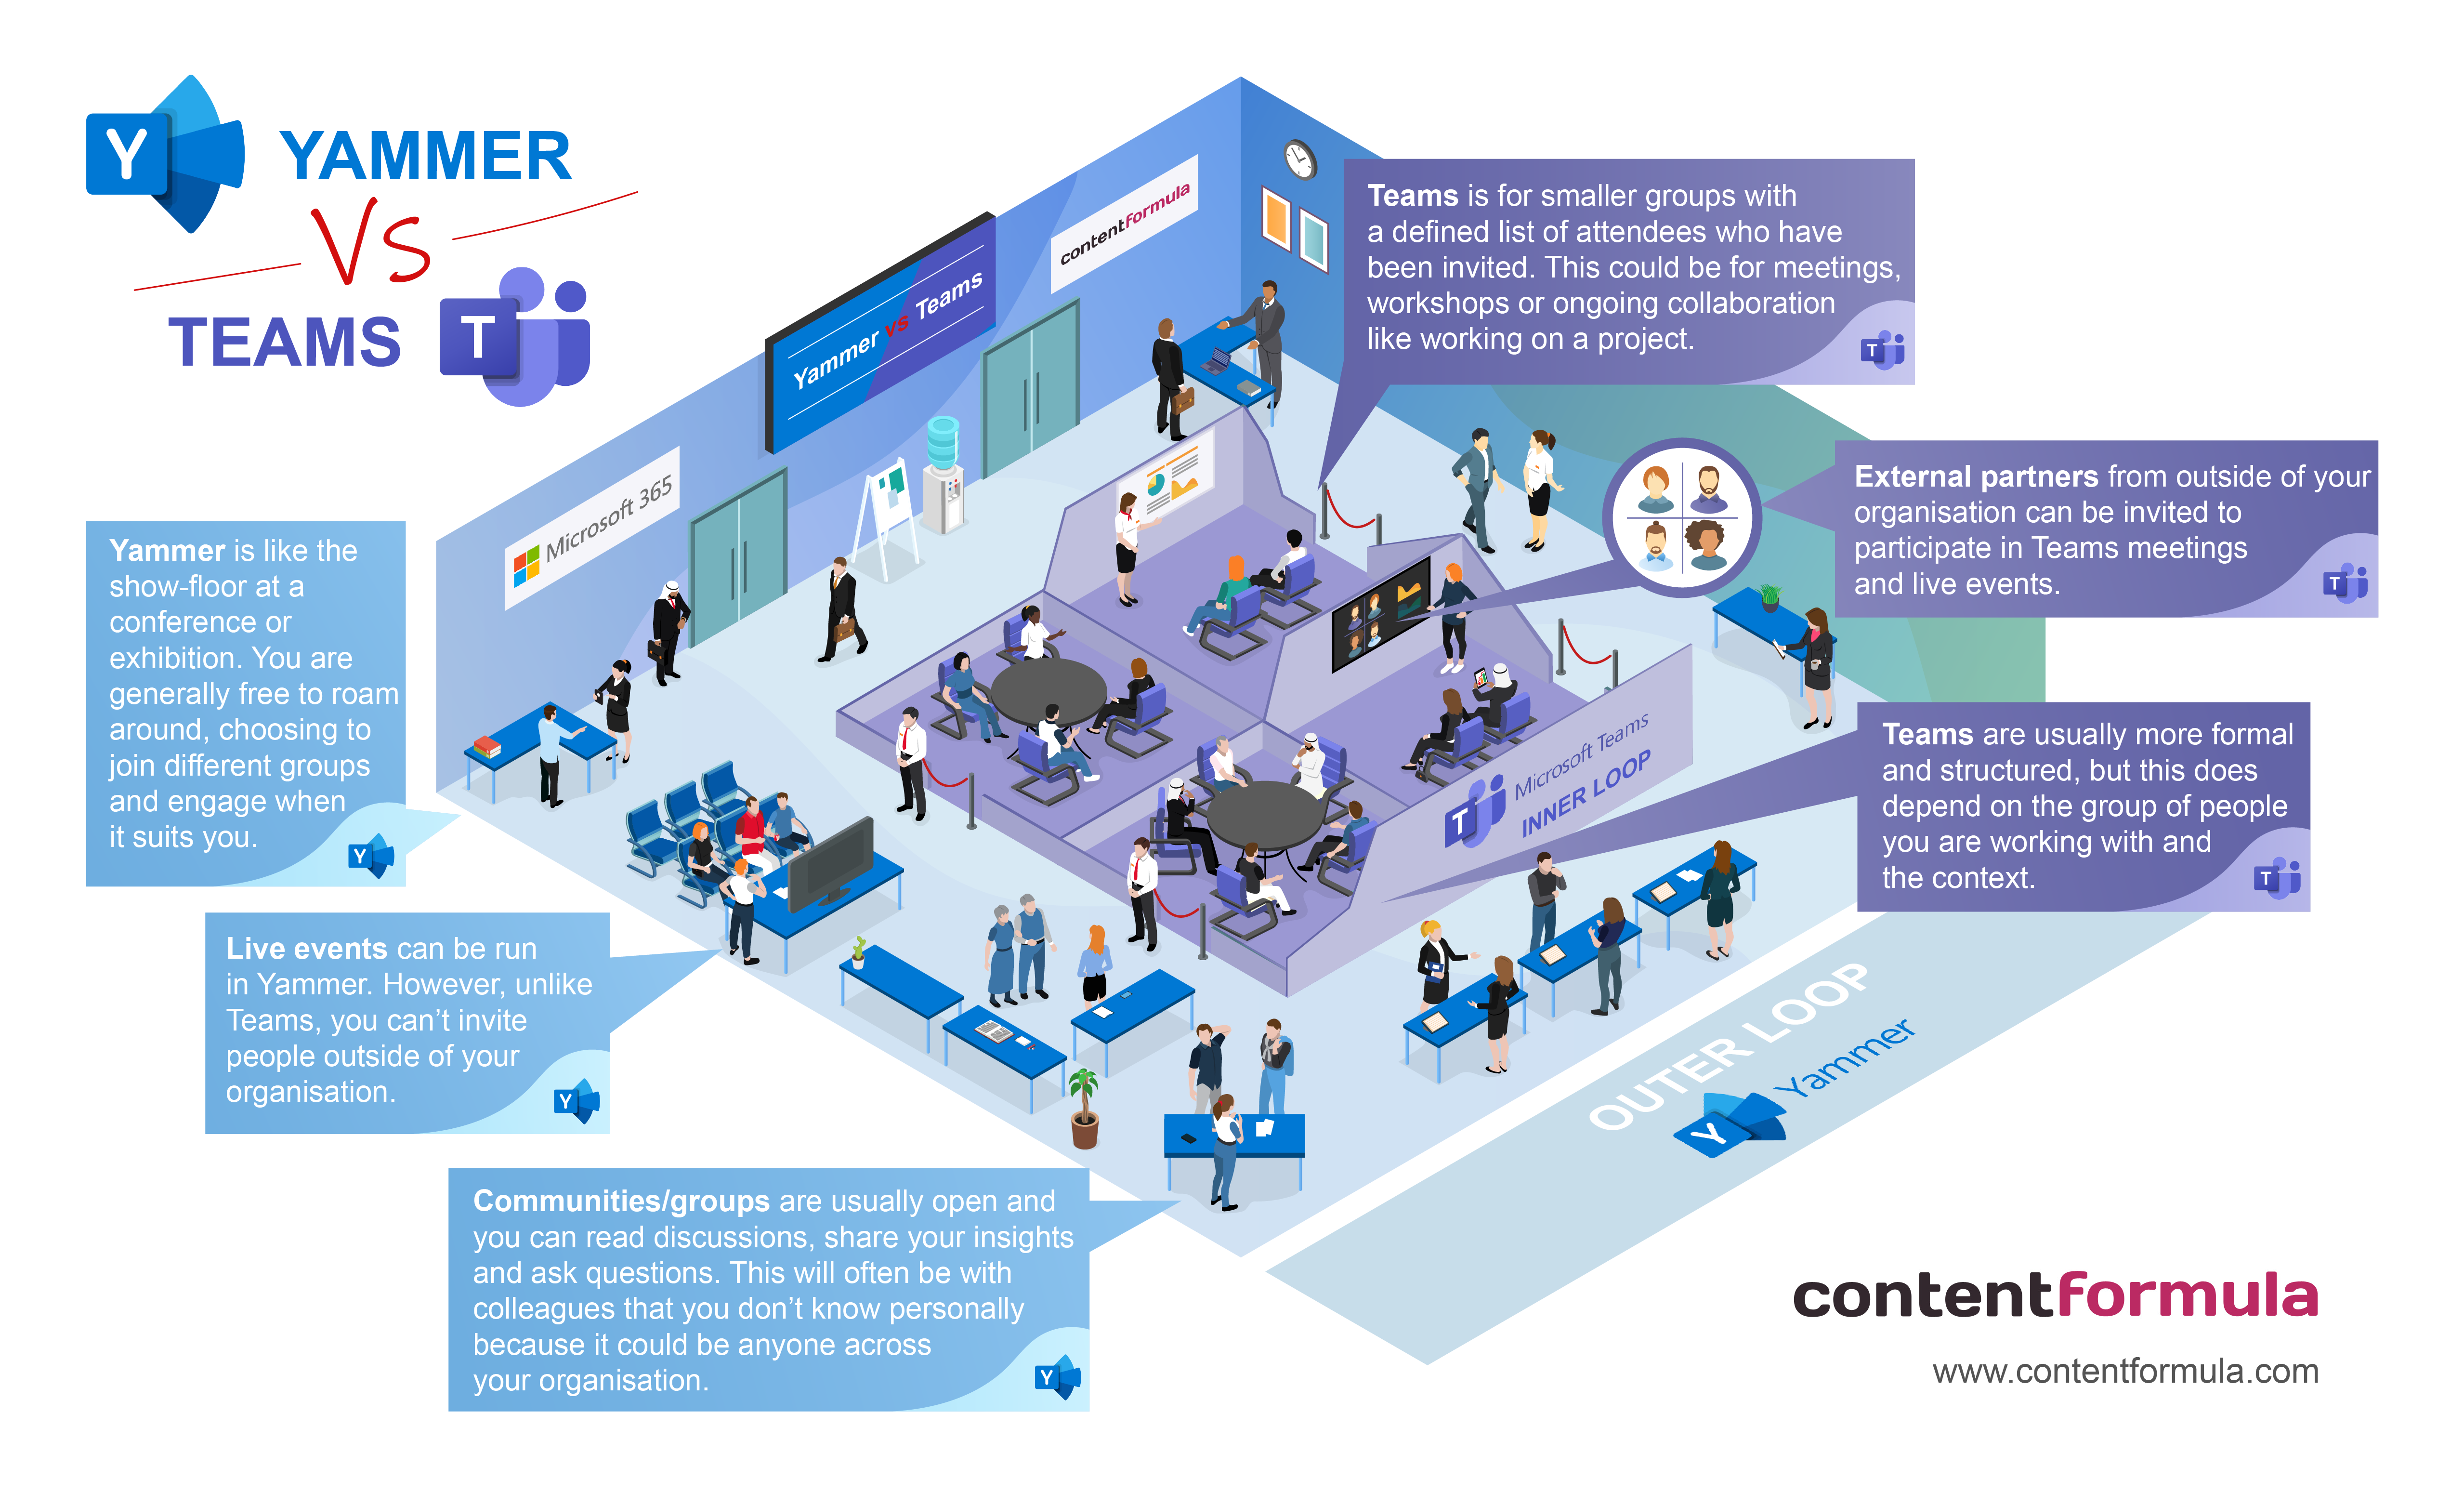 Yammer vs Teams infographic